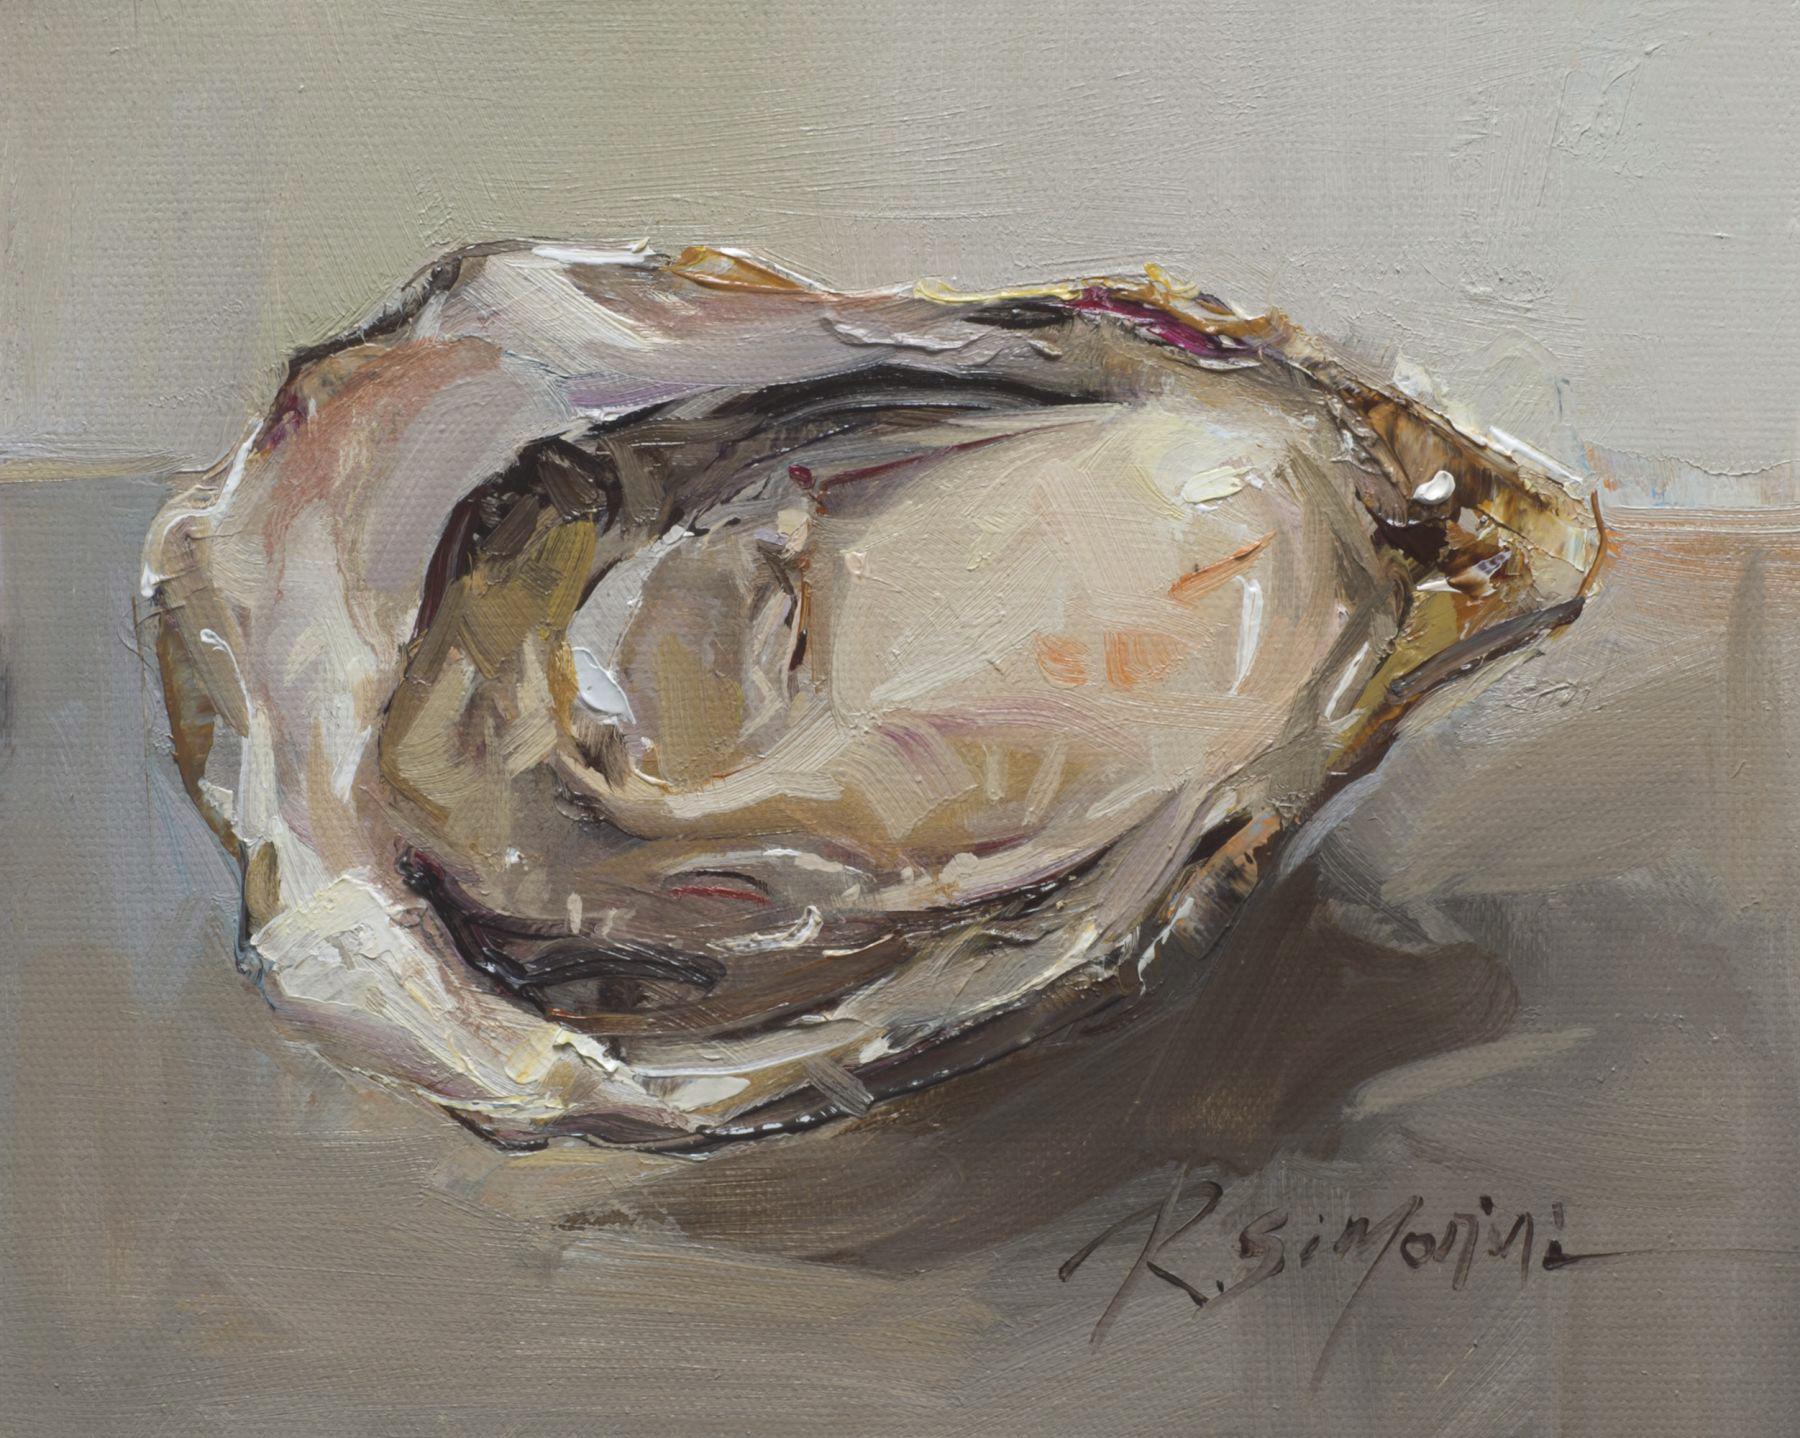 This painting by artist Ray Simonini titled "Shy is the Oyster" is a 8x10 nautical oil painting on canvas featuring a close-up of an oyster shell against a calm soft grey background.

About the artist:
Simonini was born in China in 1981. He became